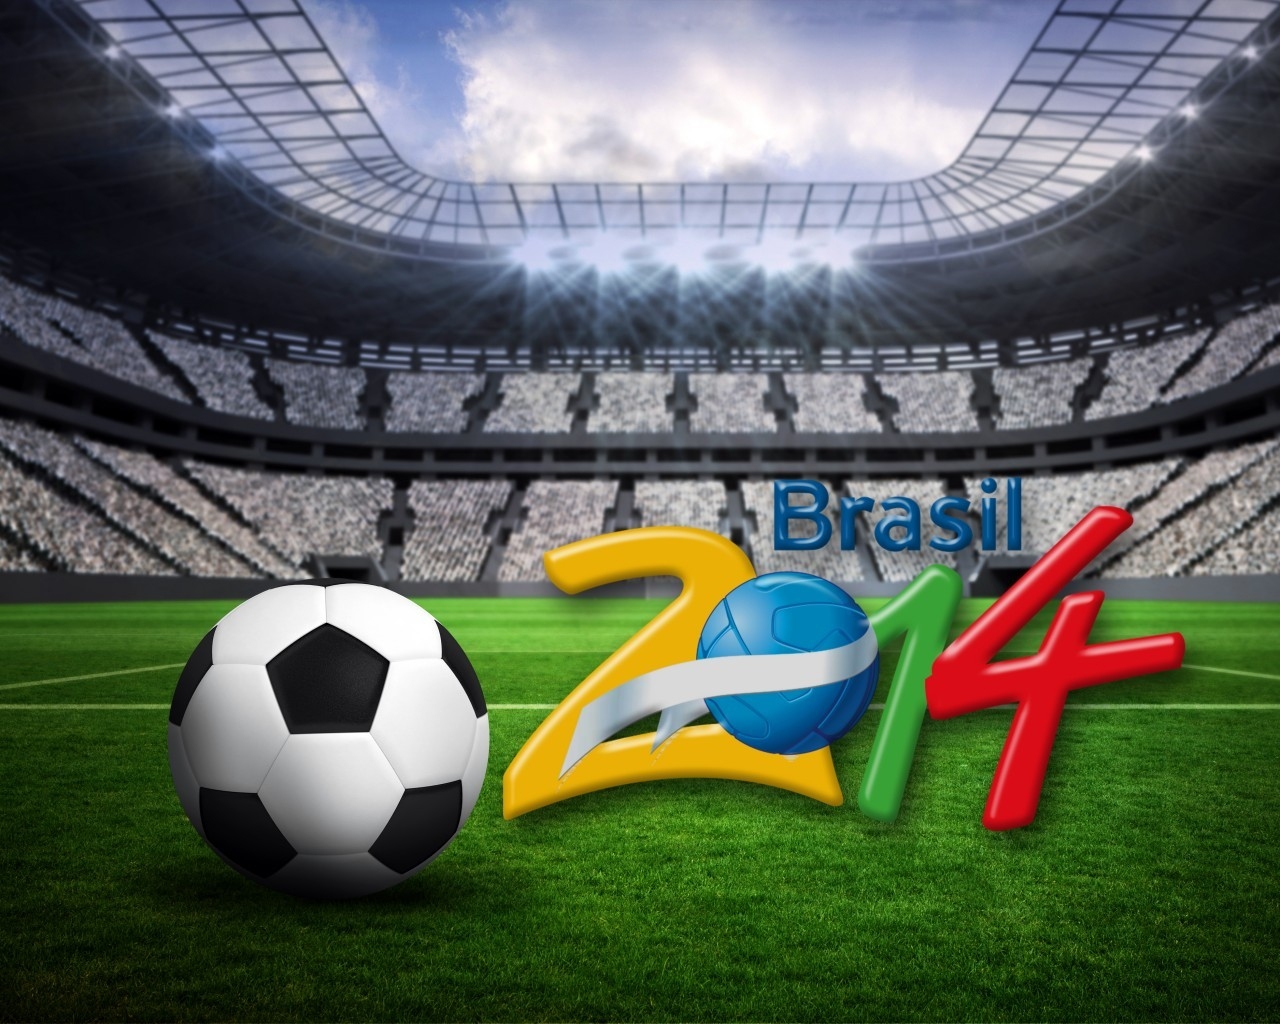 Brasil World Cup 2014 for 1280 x 1024 resolution